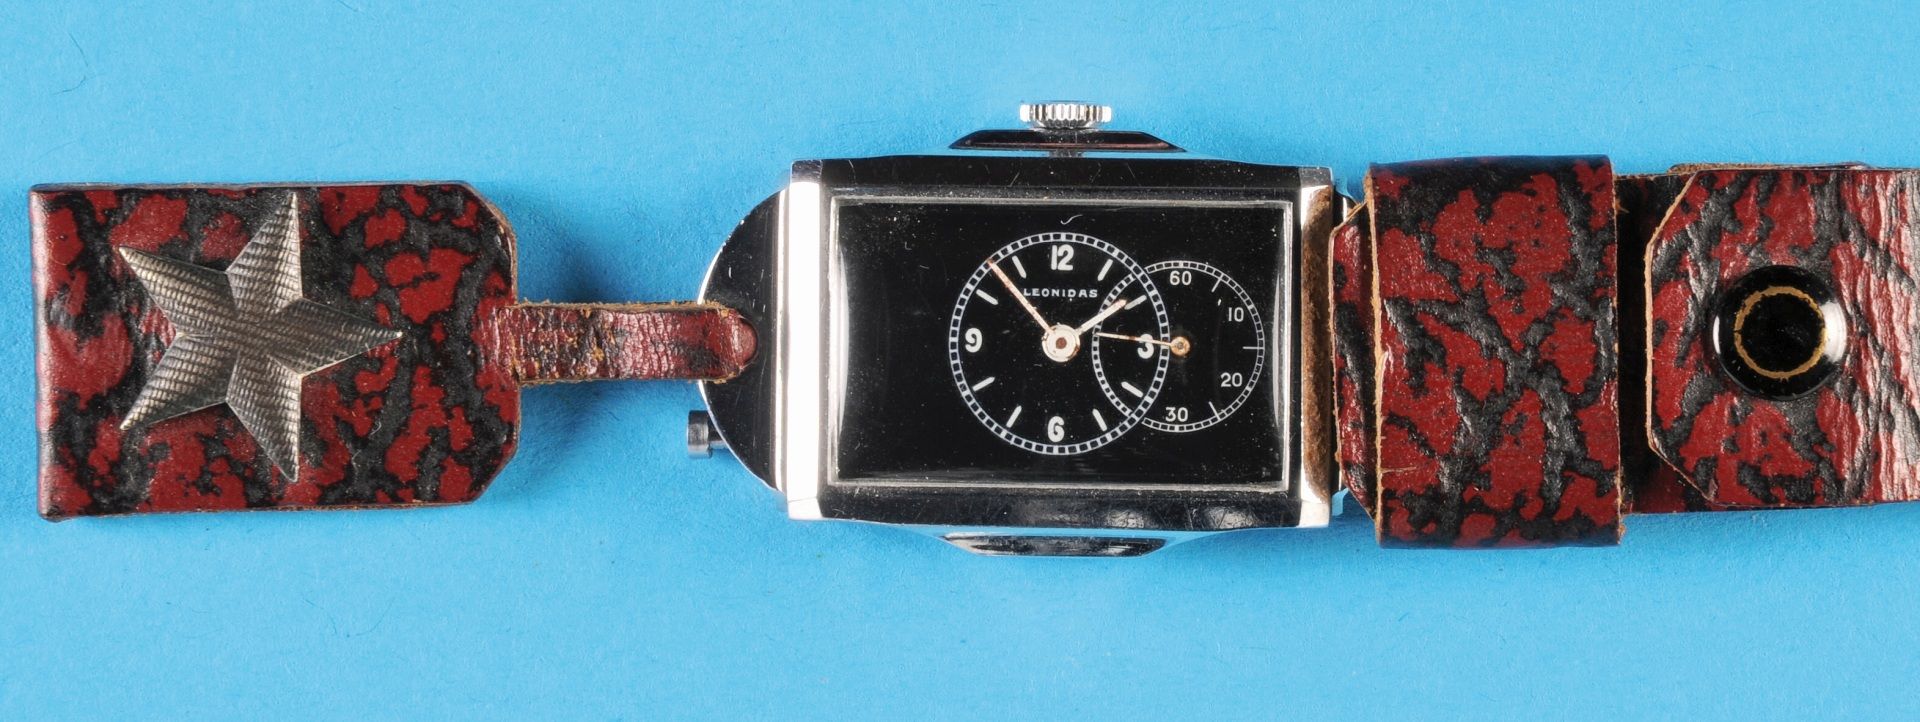 Rare Leonidas Vintage Doctor's wristwatch with stop-seconds second via side pusher, case in Art Deco